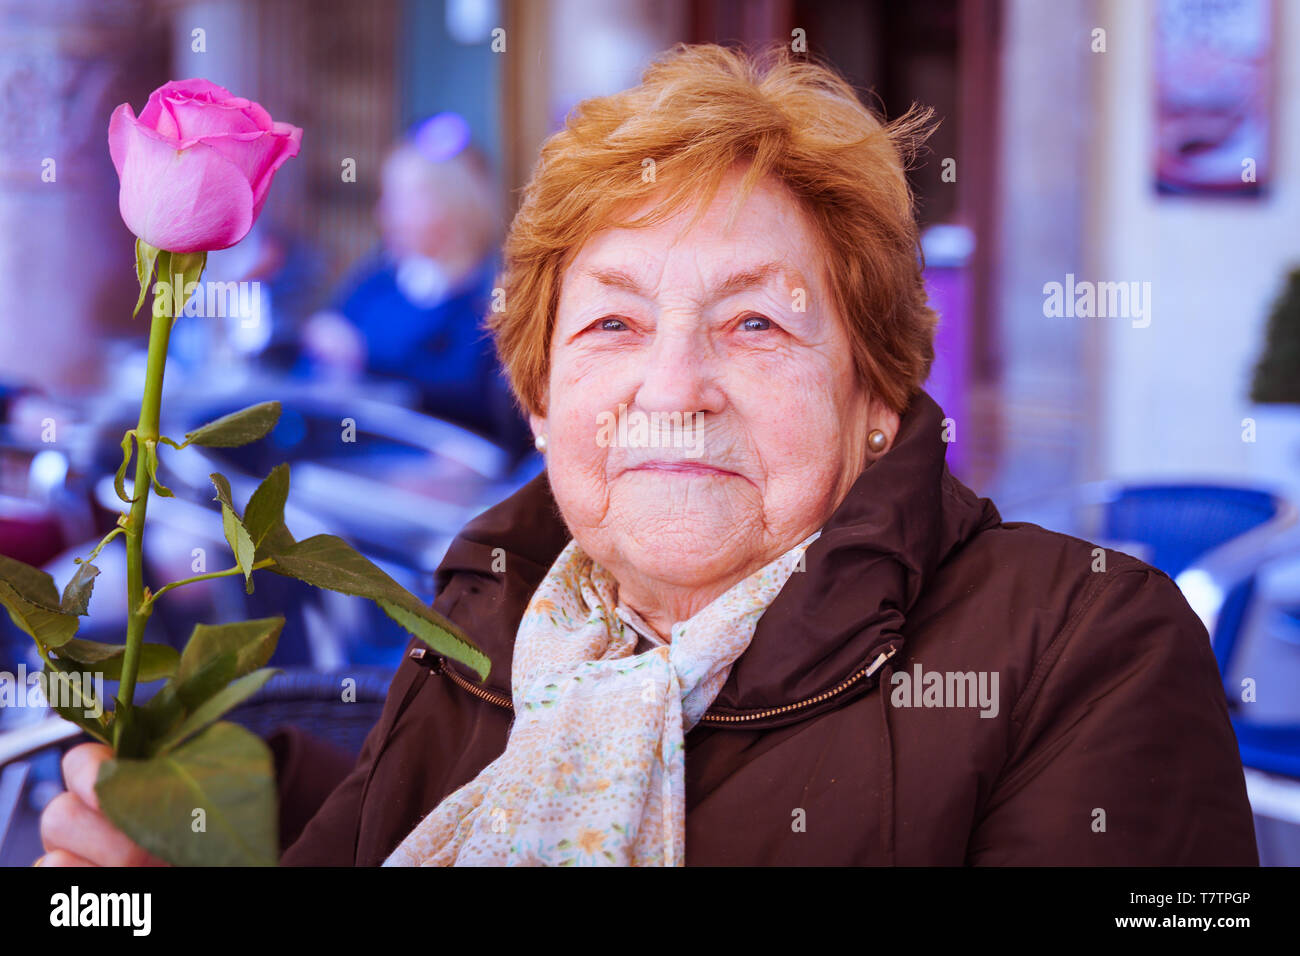 Smiling old woman with a pink rose Stock Photo